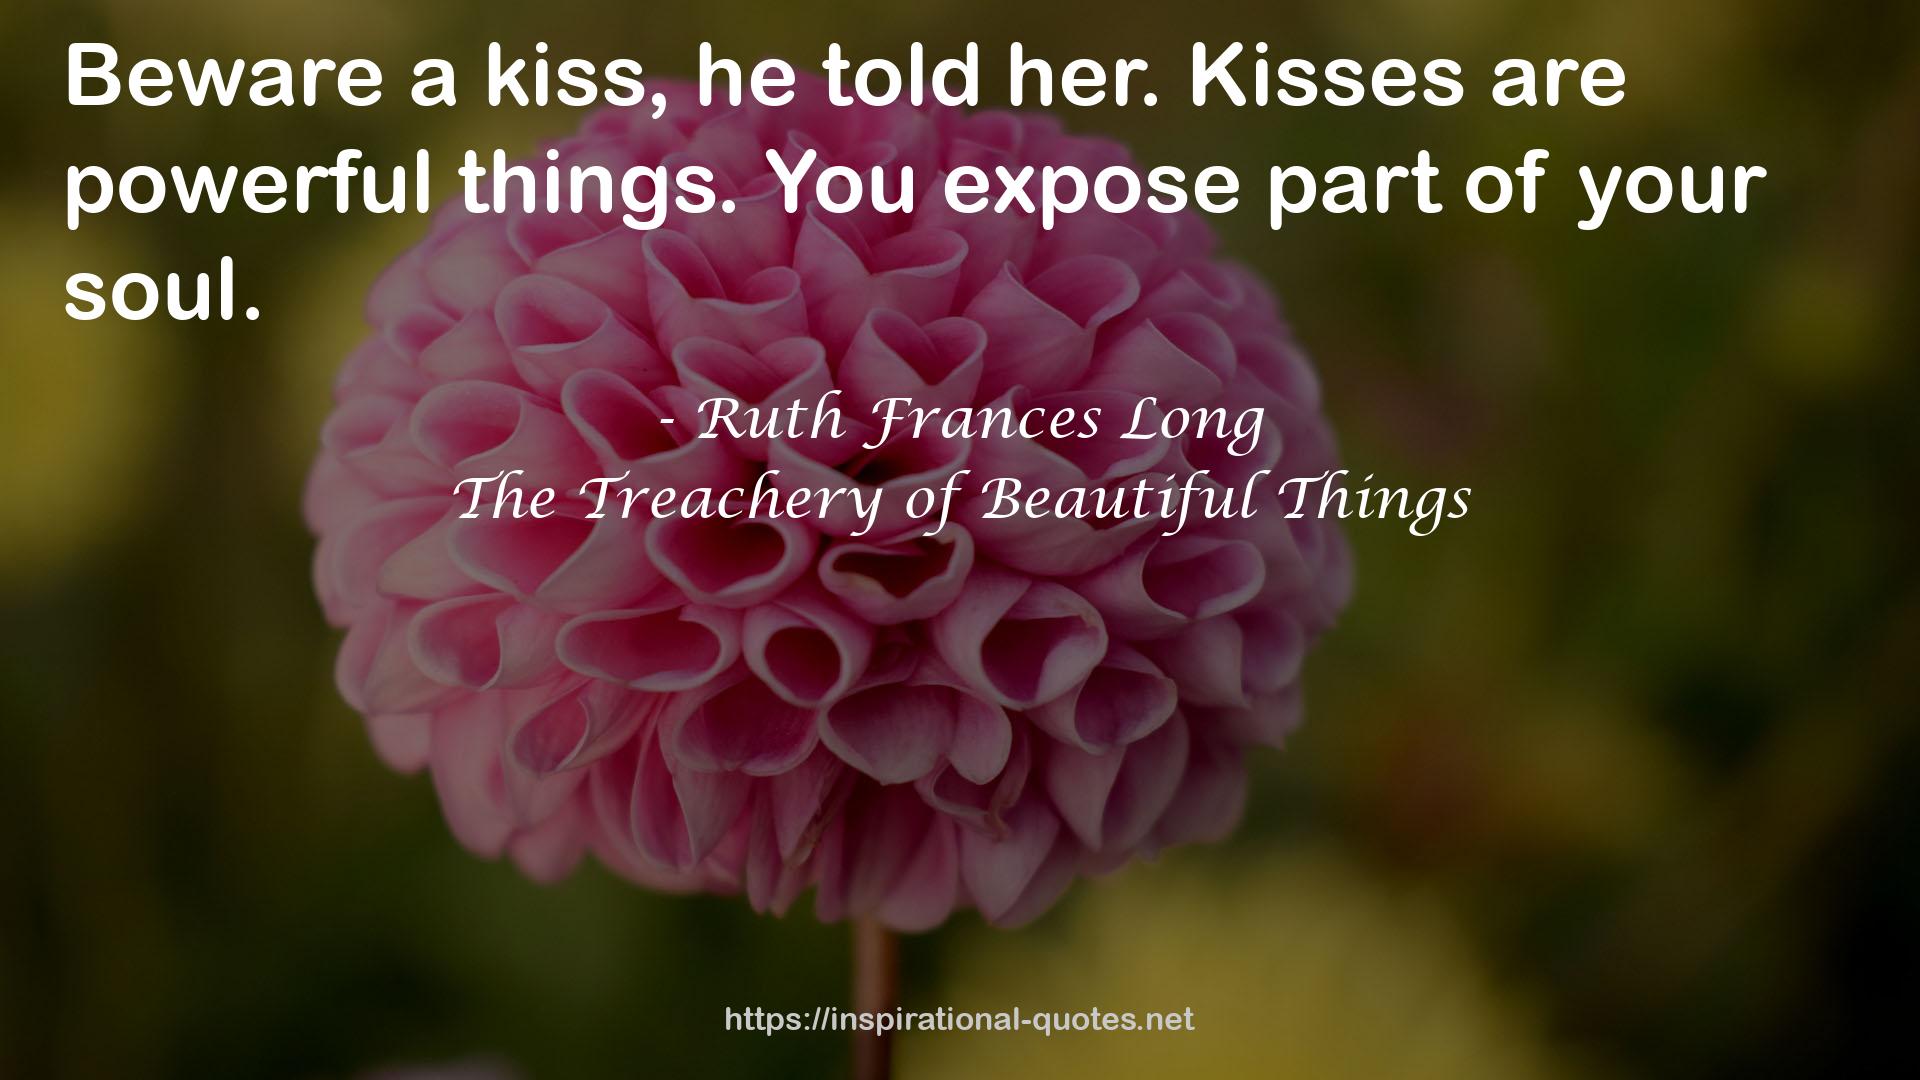 Ruth Frances Long QUOTES